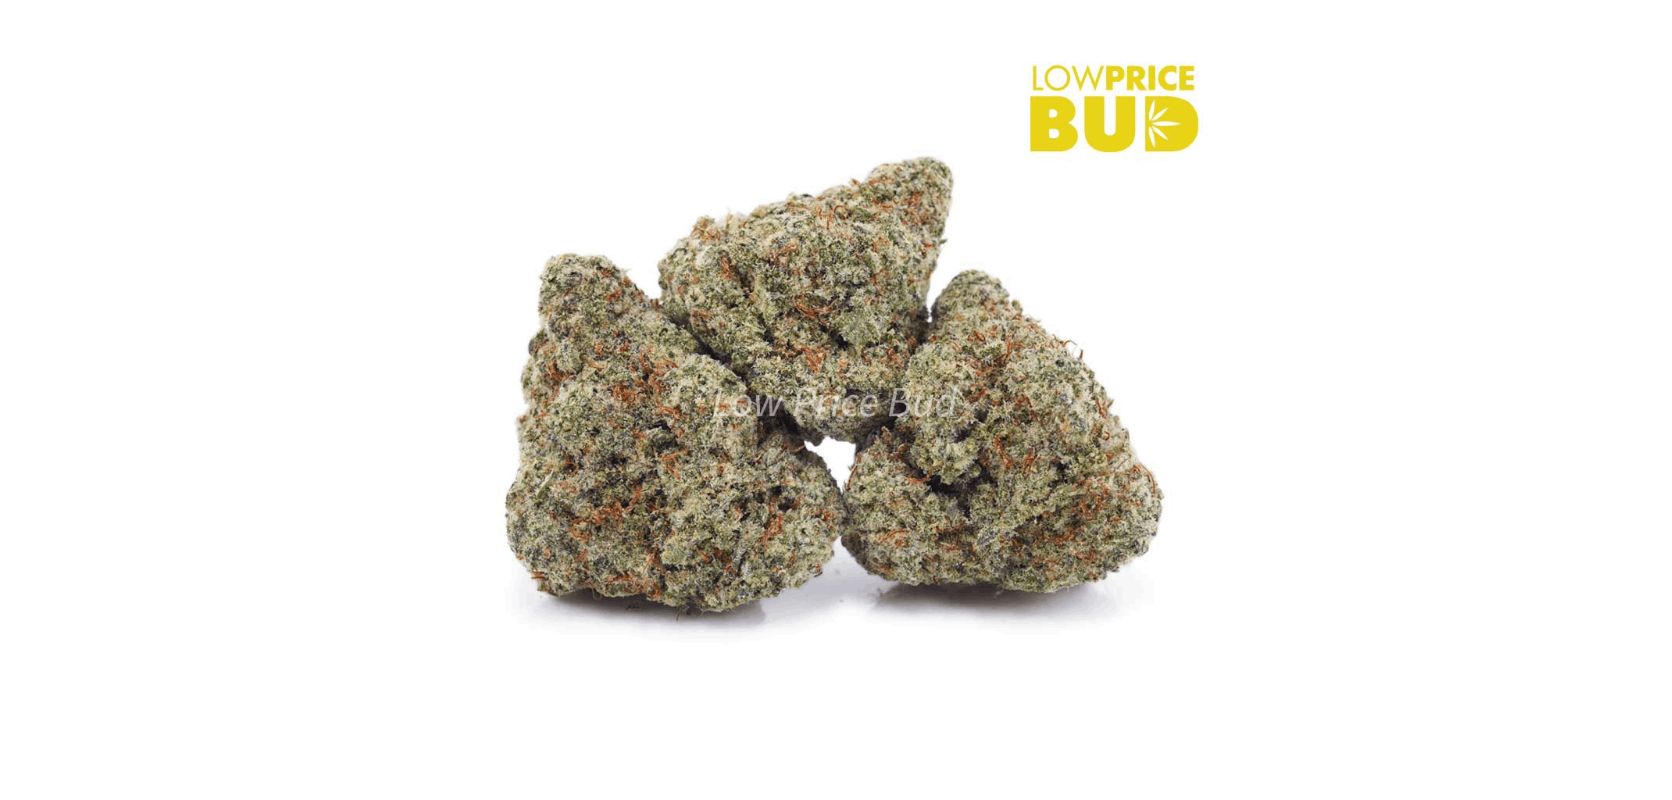 London Pound Cake is a highly sought-after Indica-dominant hybrid strain that has taken the cannabis community by storm. 